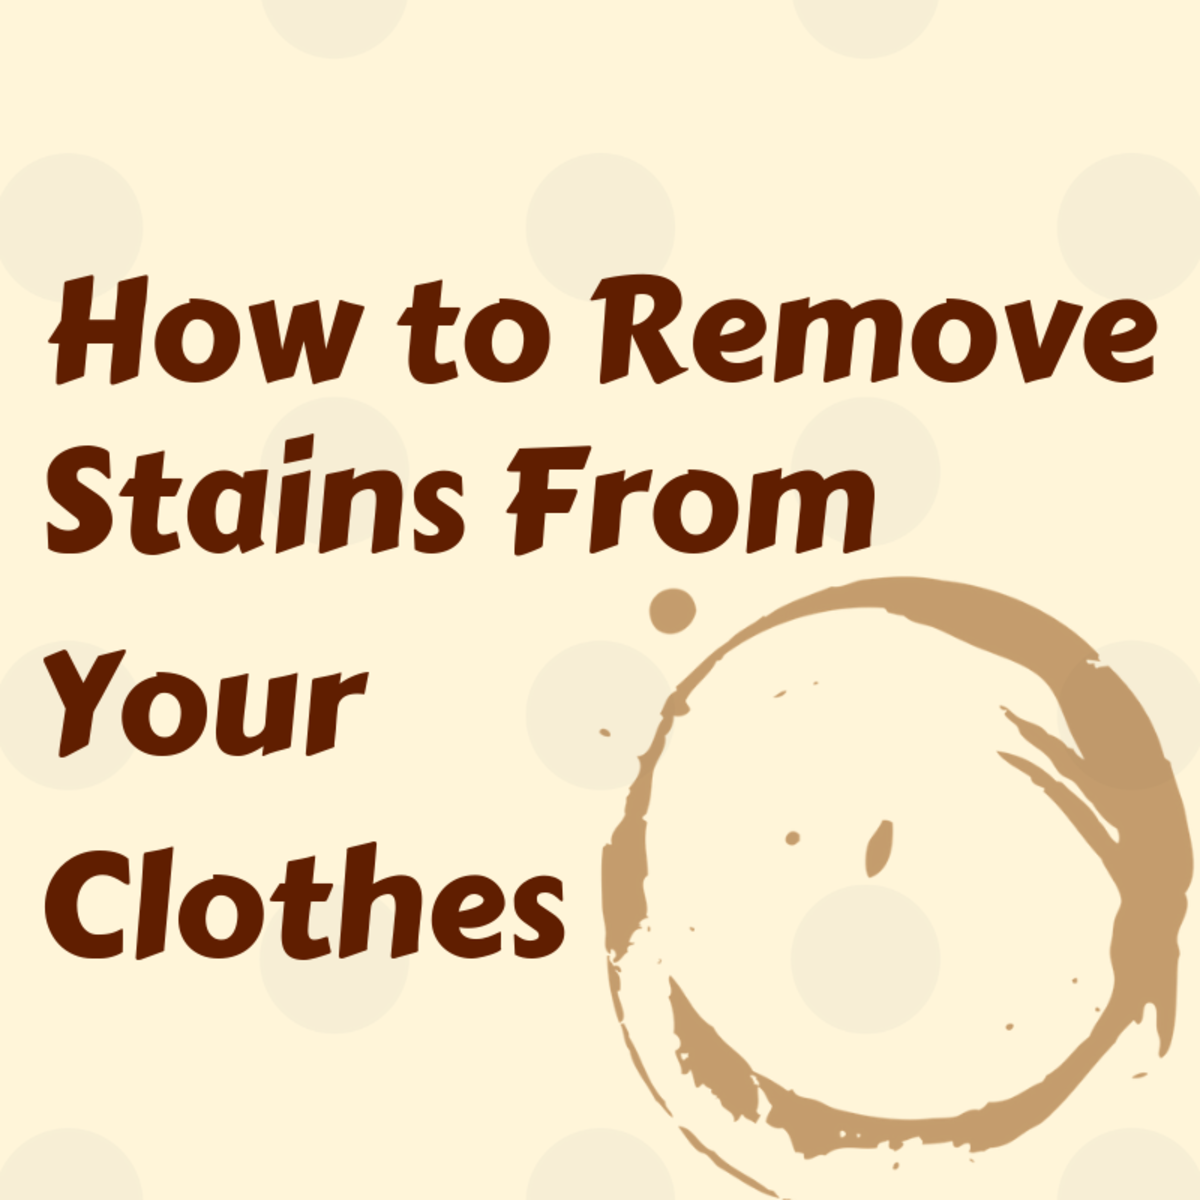 How to Remove Stains From Your Clothes